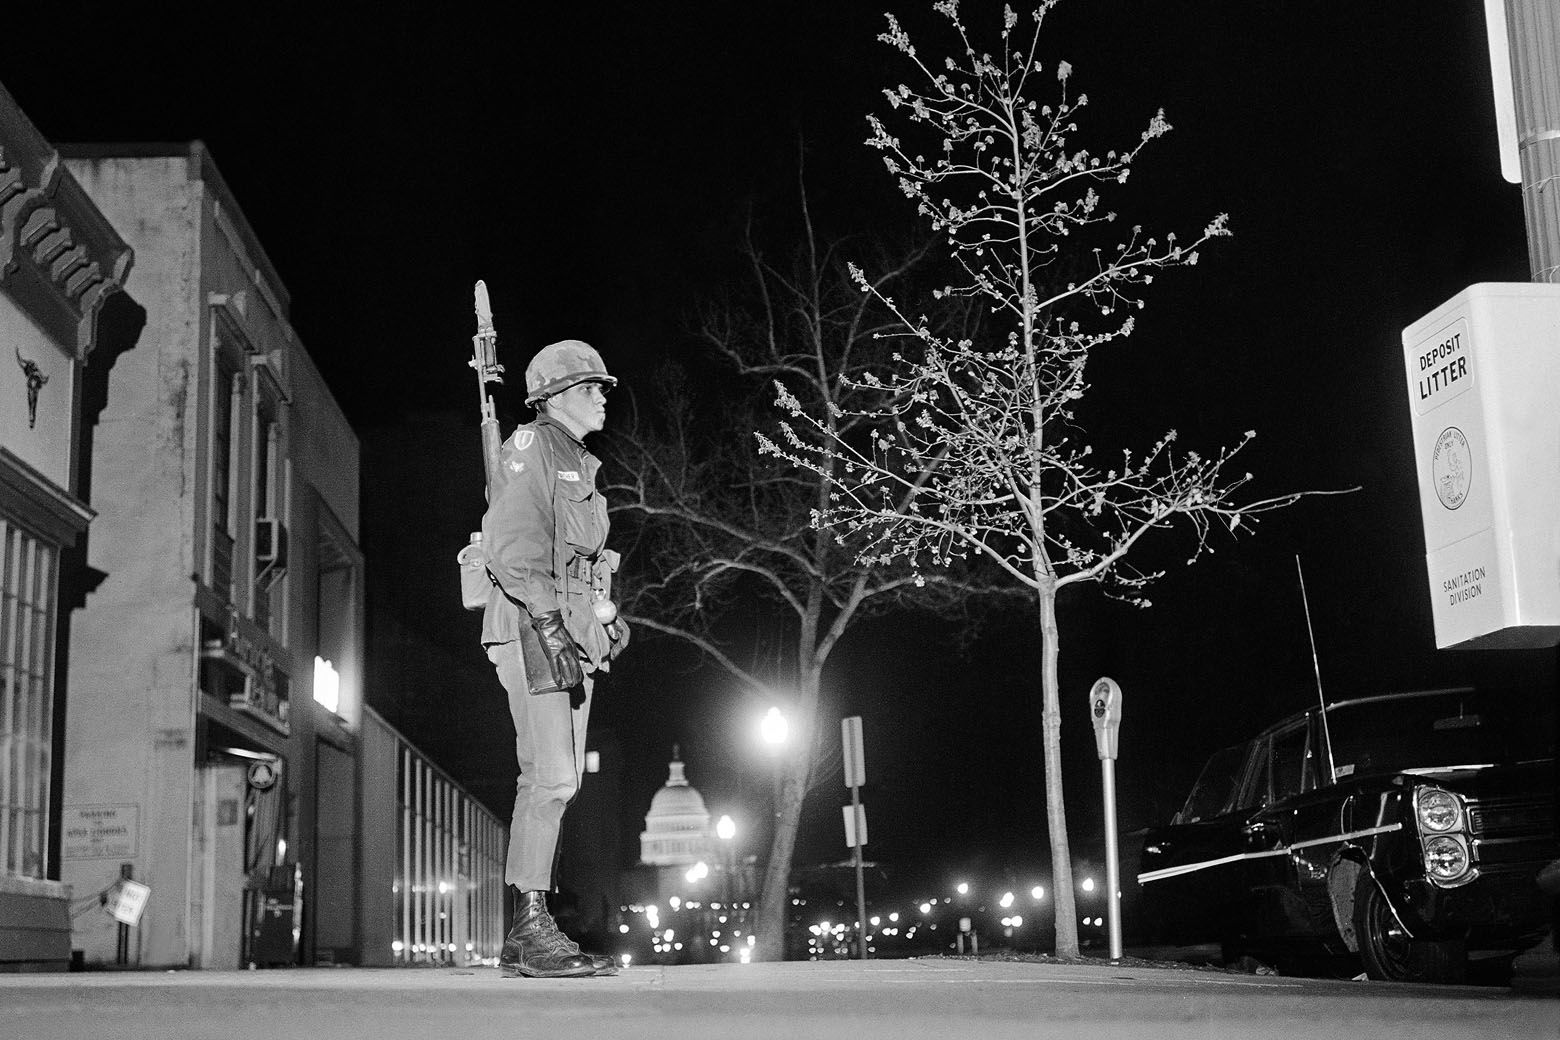 A soldier keeps watch as he stands guard along Pennsylvania Avenue near 7th Street, in the northwest section of Washington, April 6, 1968. The street is deserted, with a curfew imposed at 4 p.m., before darkness. The lighted dome of the U.S. capitol building is in the background. (AP Photo/Bob Schutz)